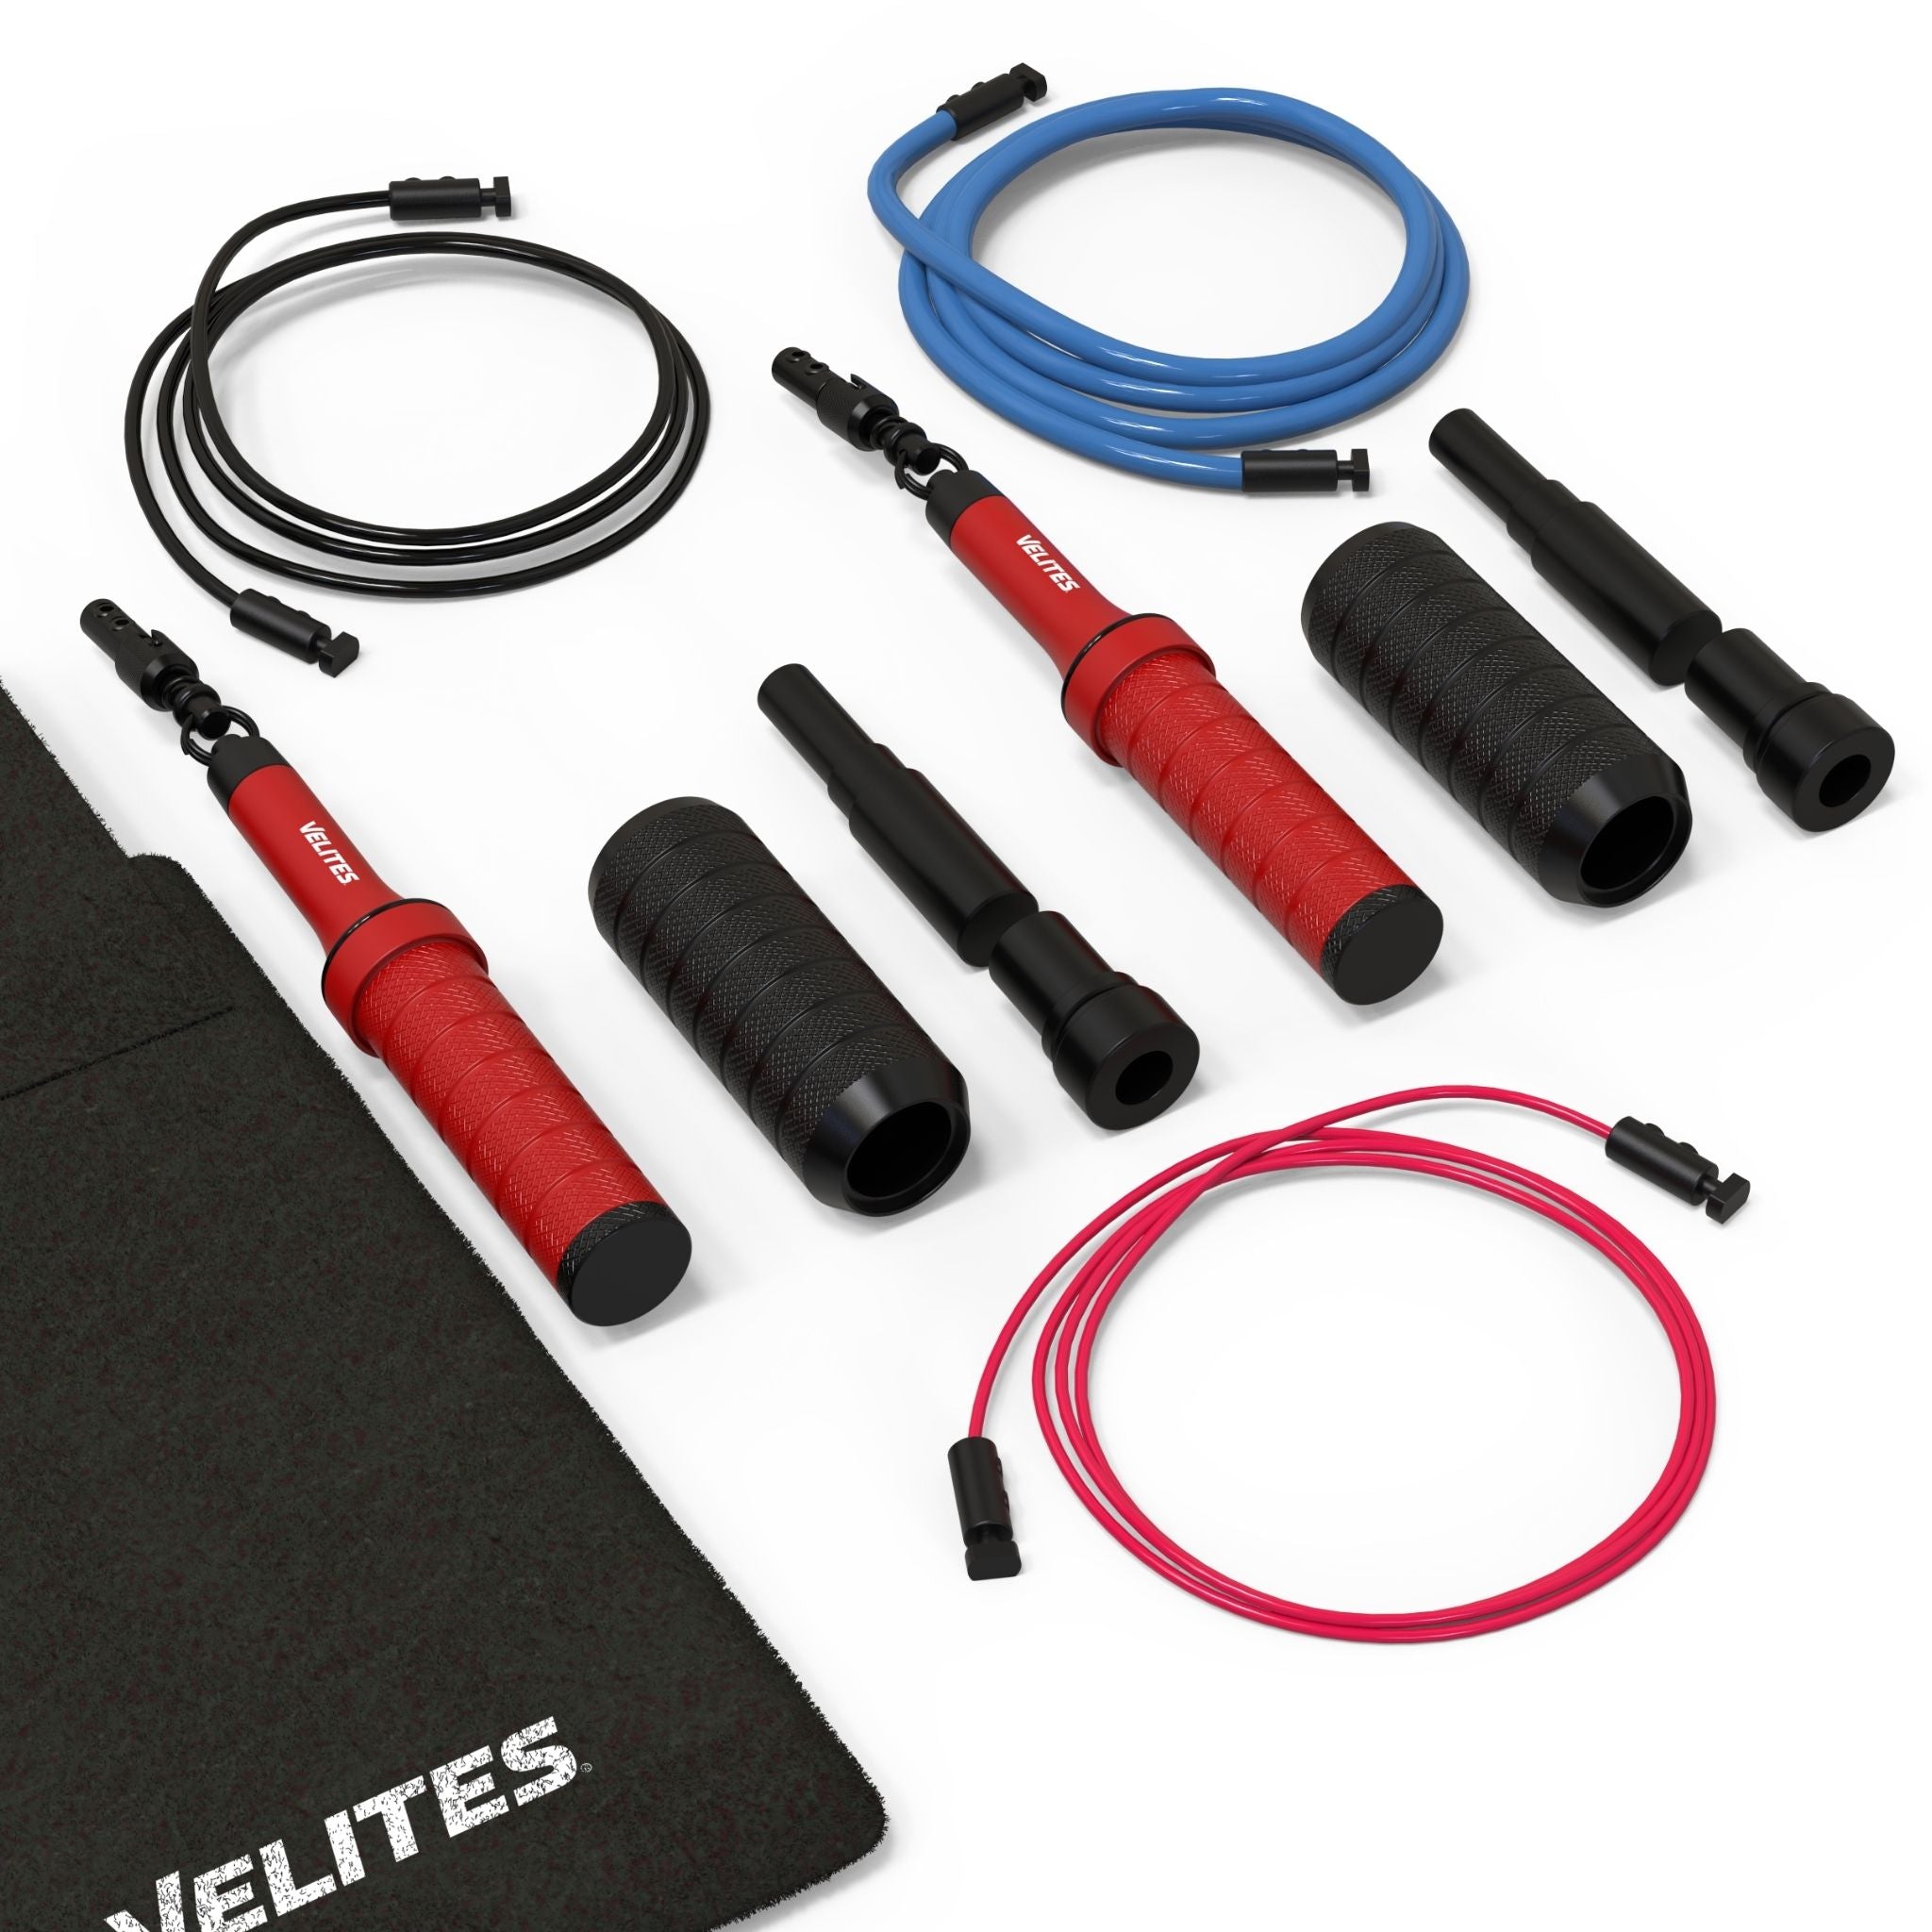 Pack Comba Earth 2.0 Velites + Lastres + Cables - rojo - 